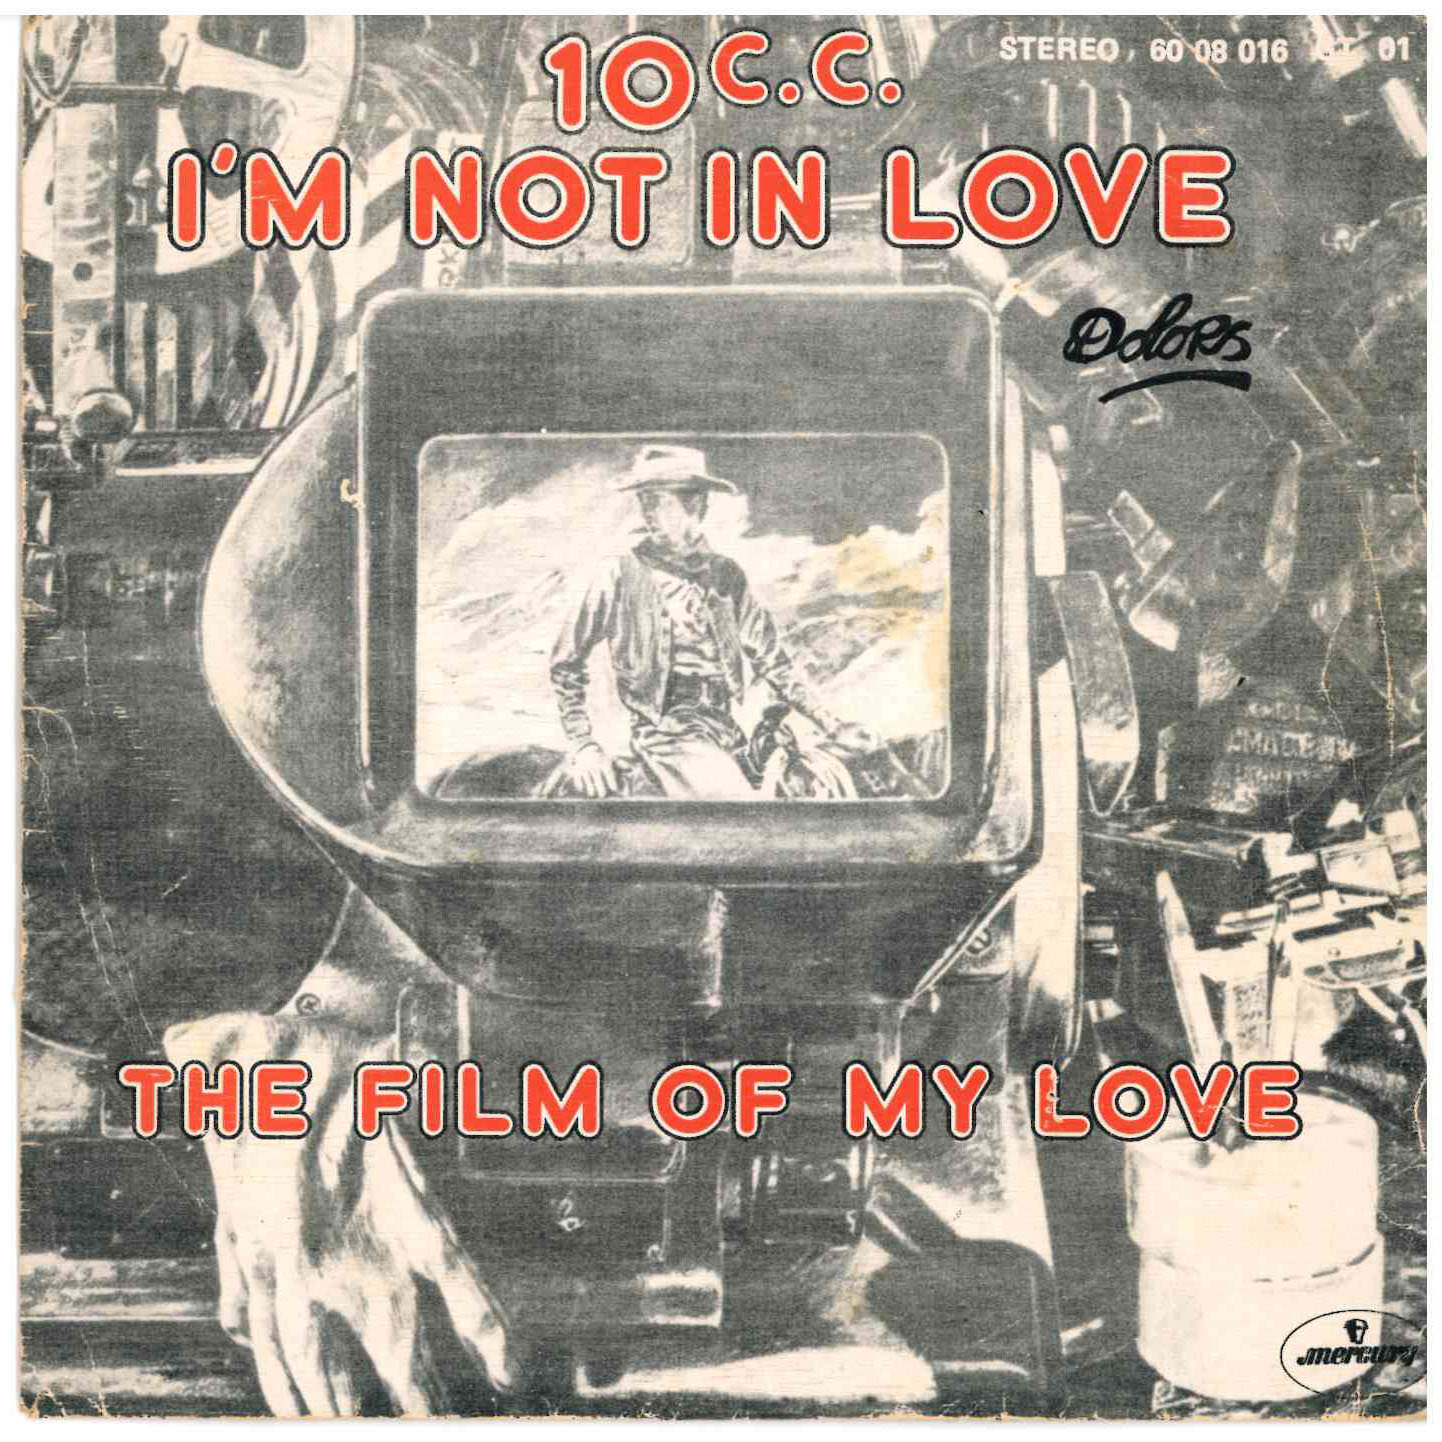 10cc - I'm Not In Love/The Film Of My Love